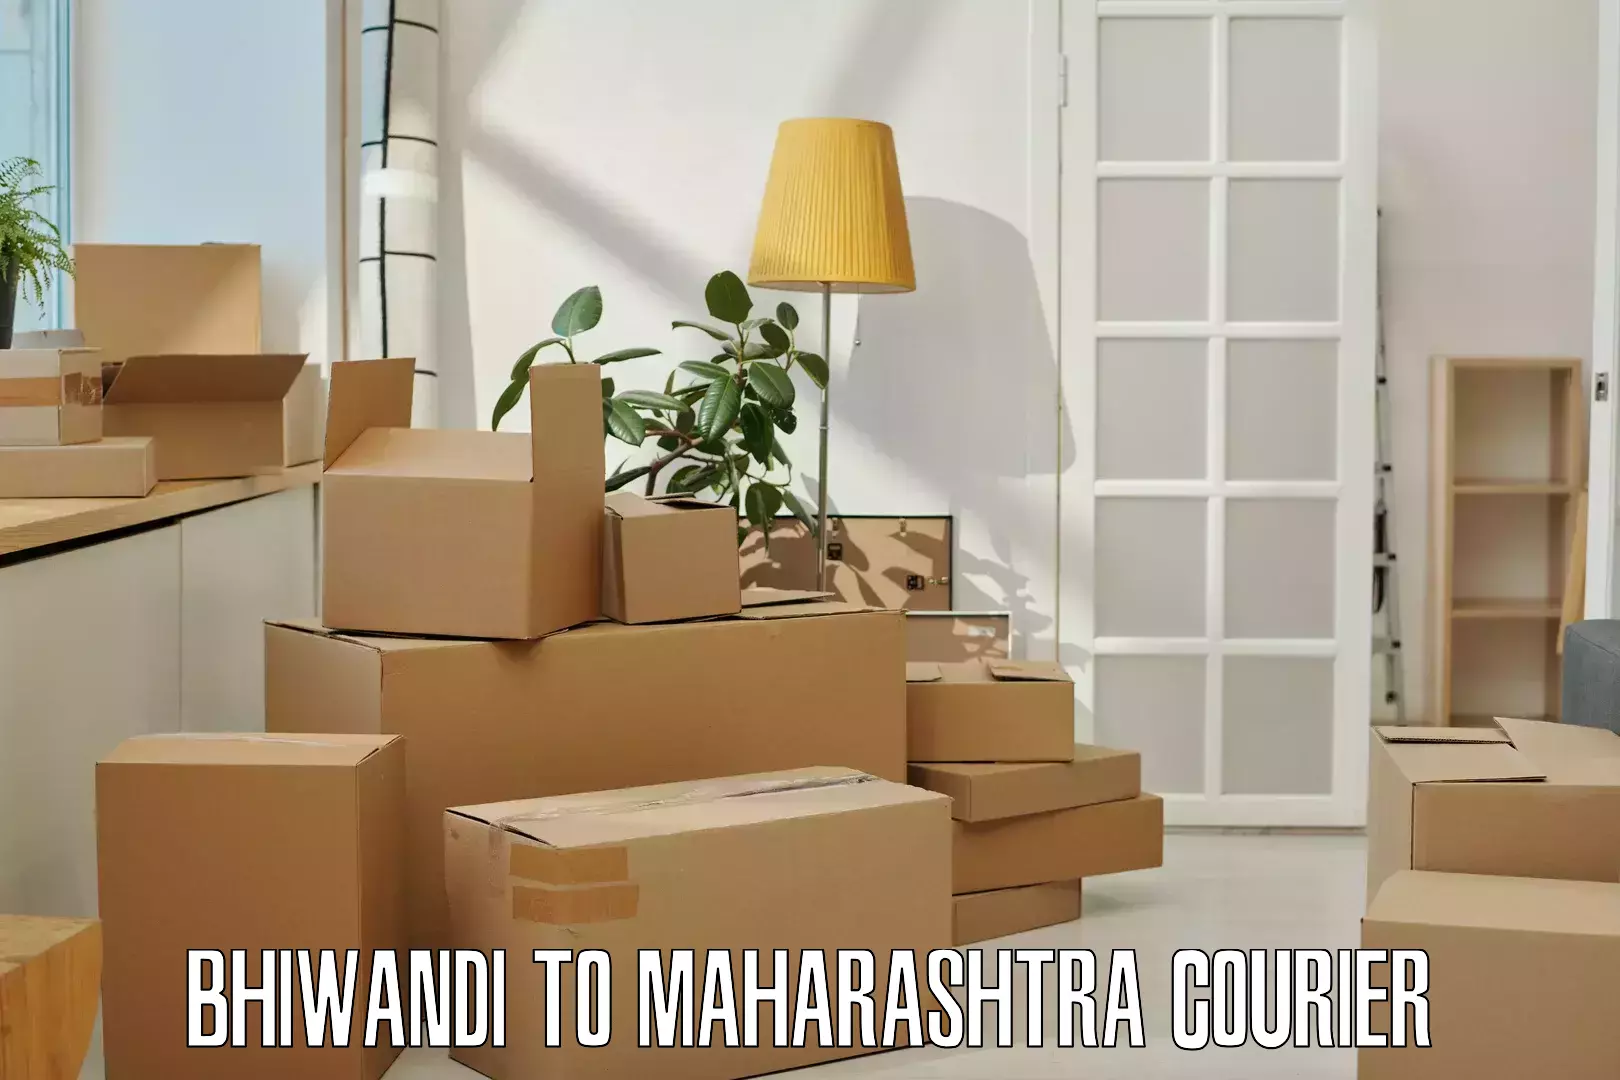 End-to-end delivery Bhiwandi to Nagothane